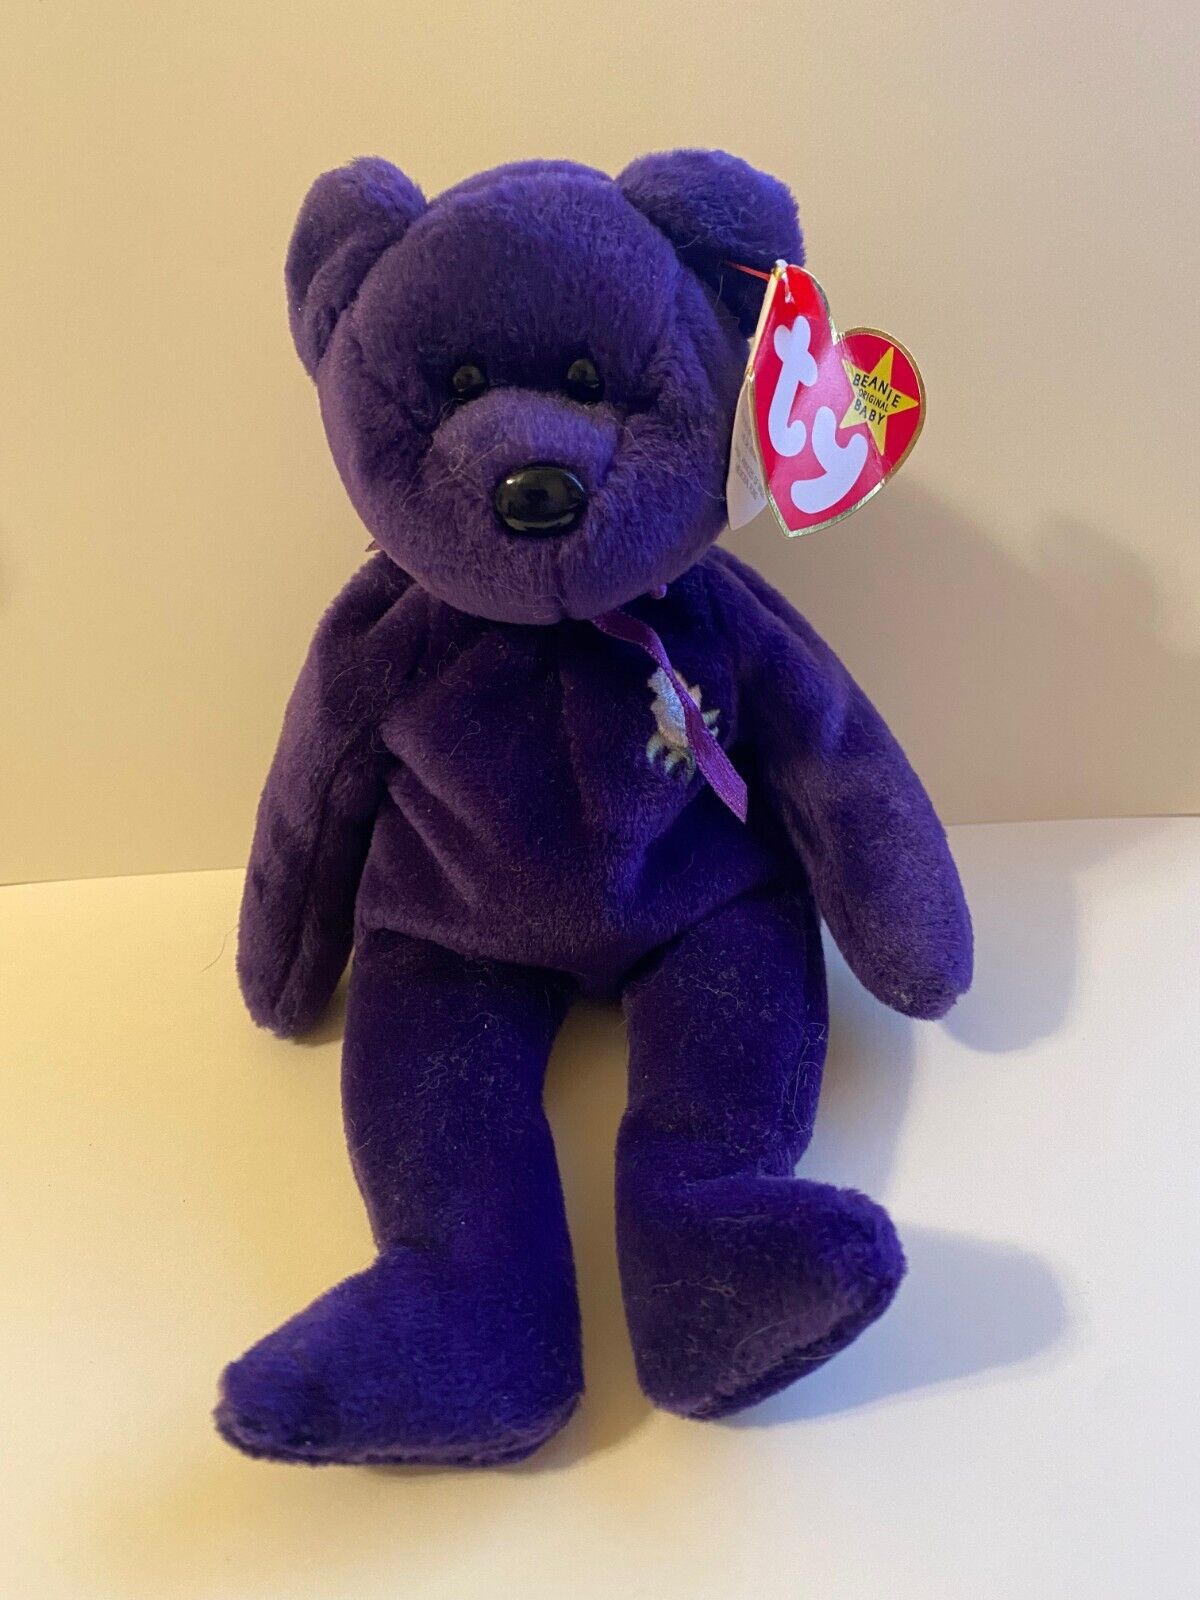 Rare 1st Edition Ty Princess Diana Beanie Baby (P.V.C. Pellets, Made in China)